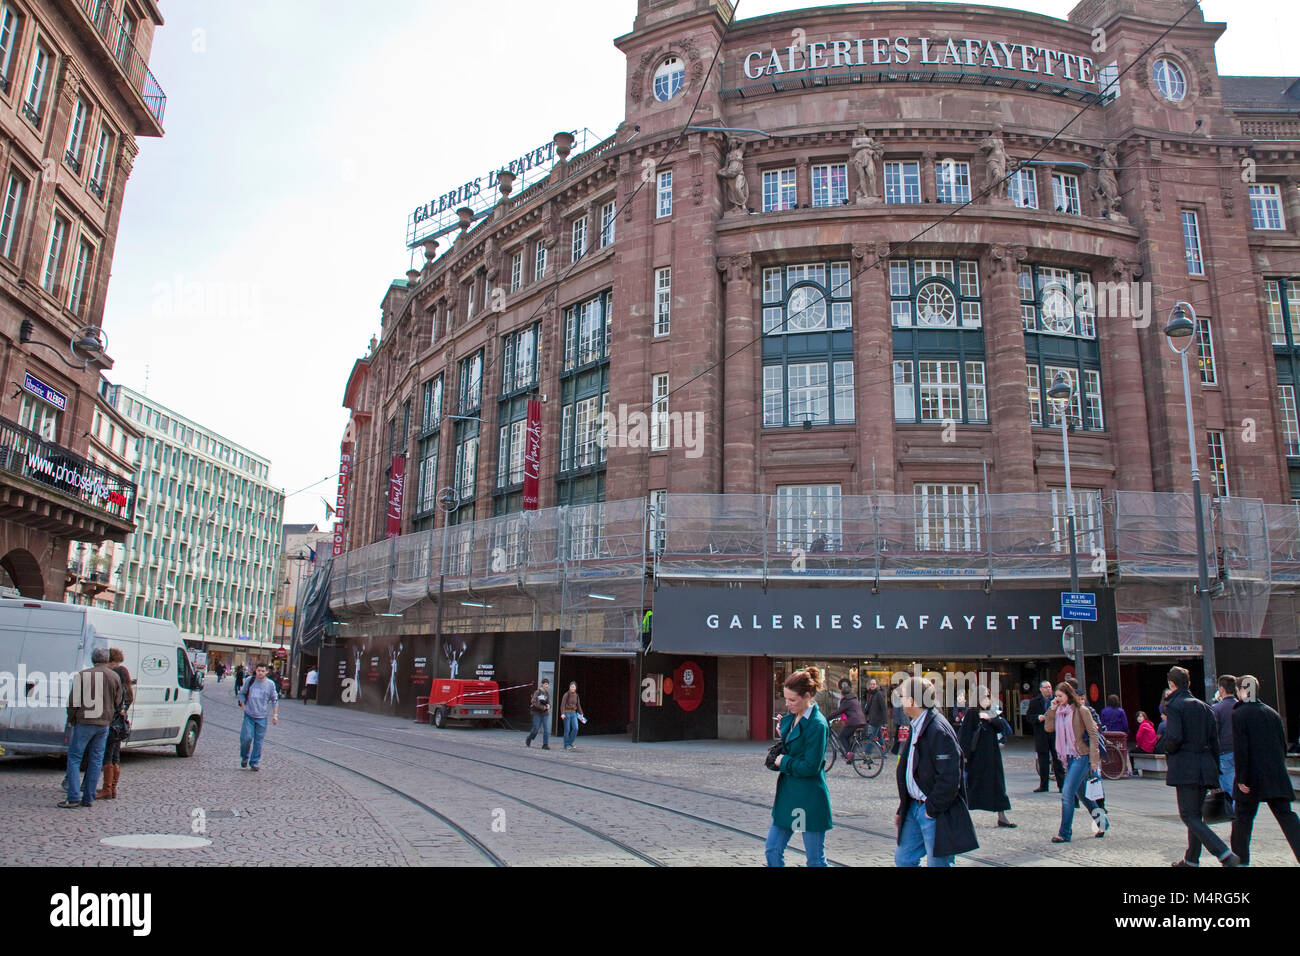 Galeries Lafayette at Klebers square, Strasbourg, Alsace, Bas-Rhin, France, Europe Stock Photo